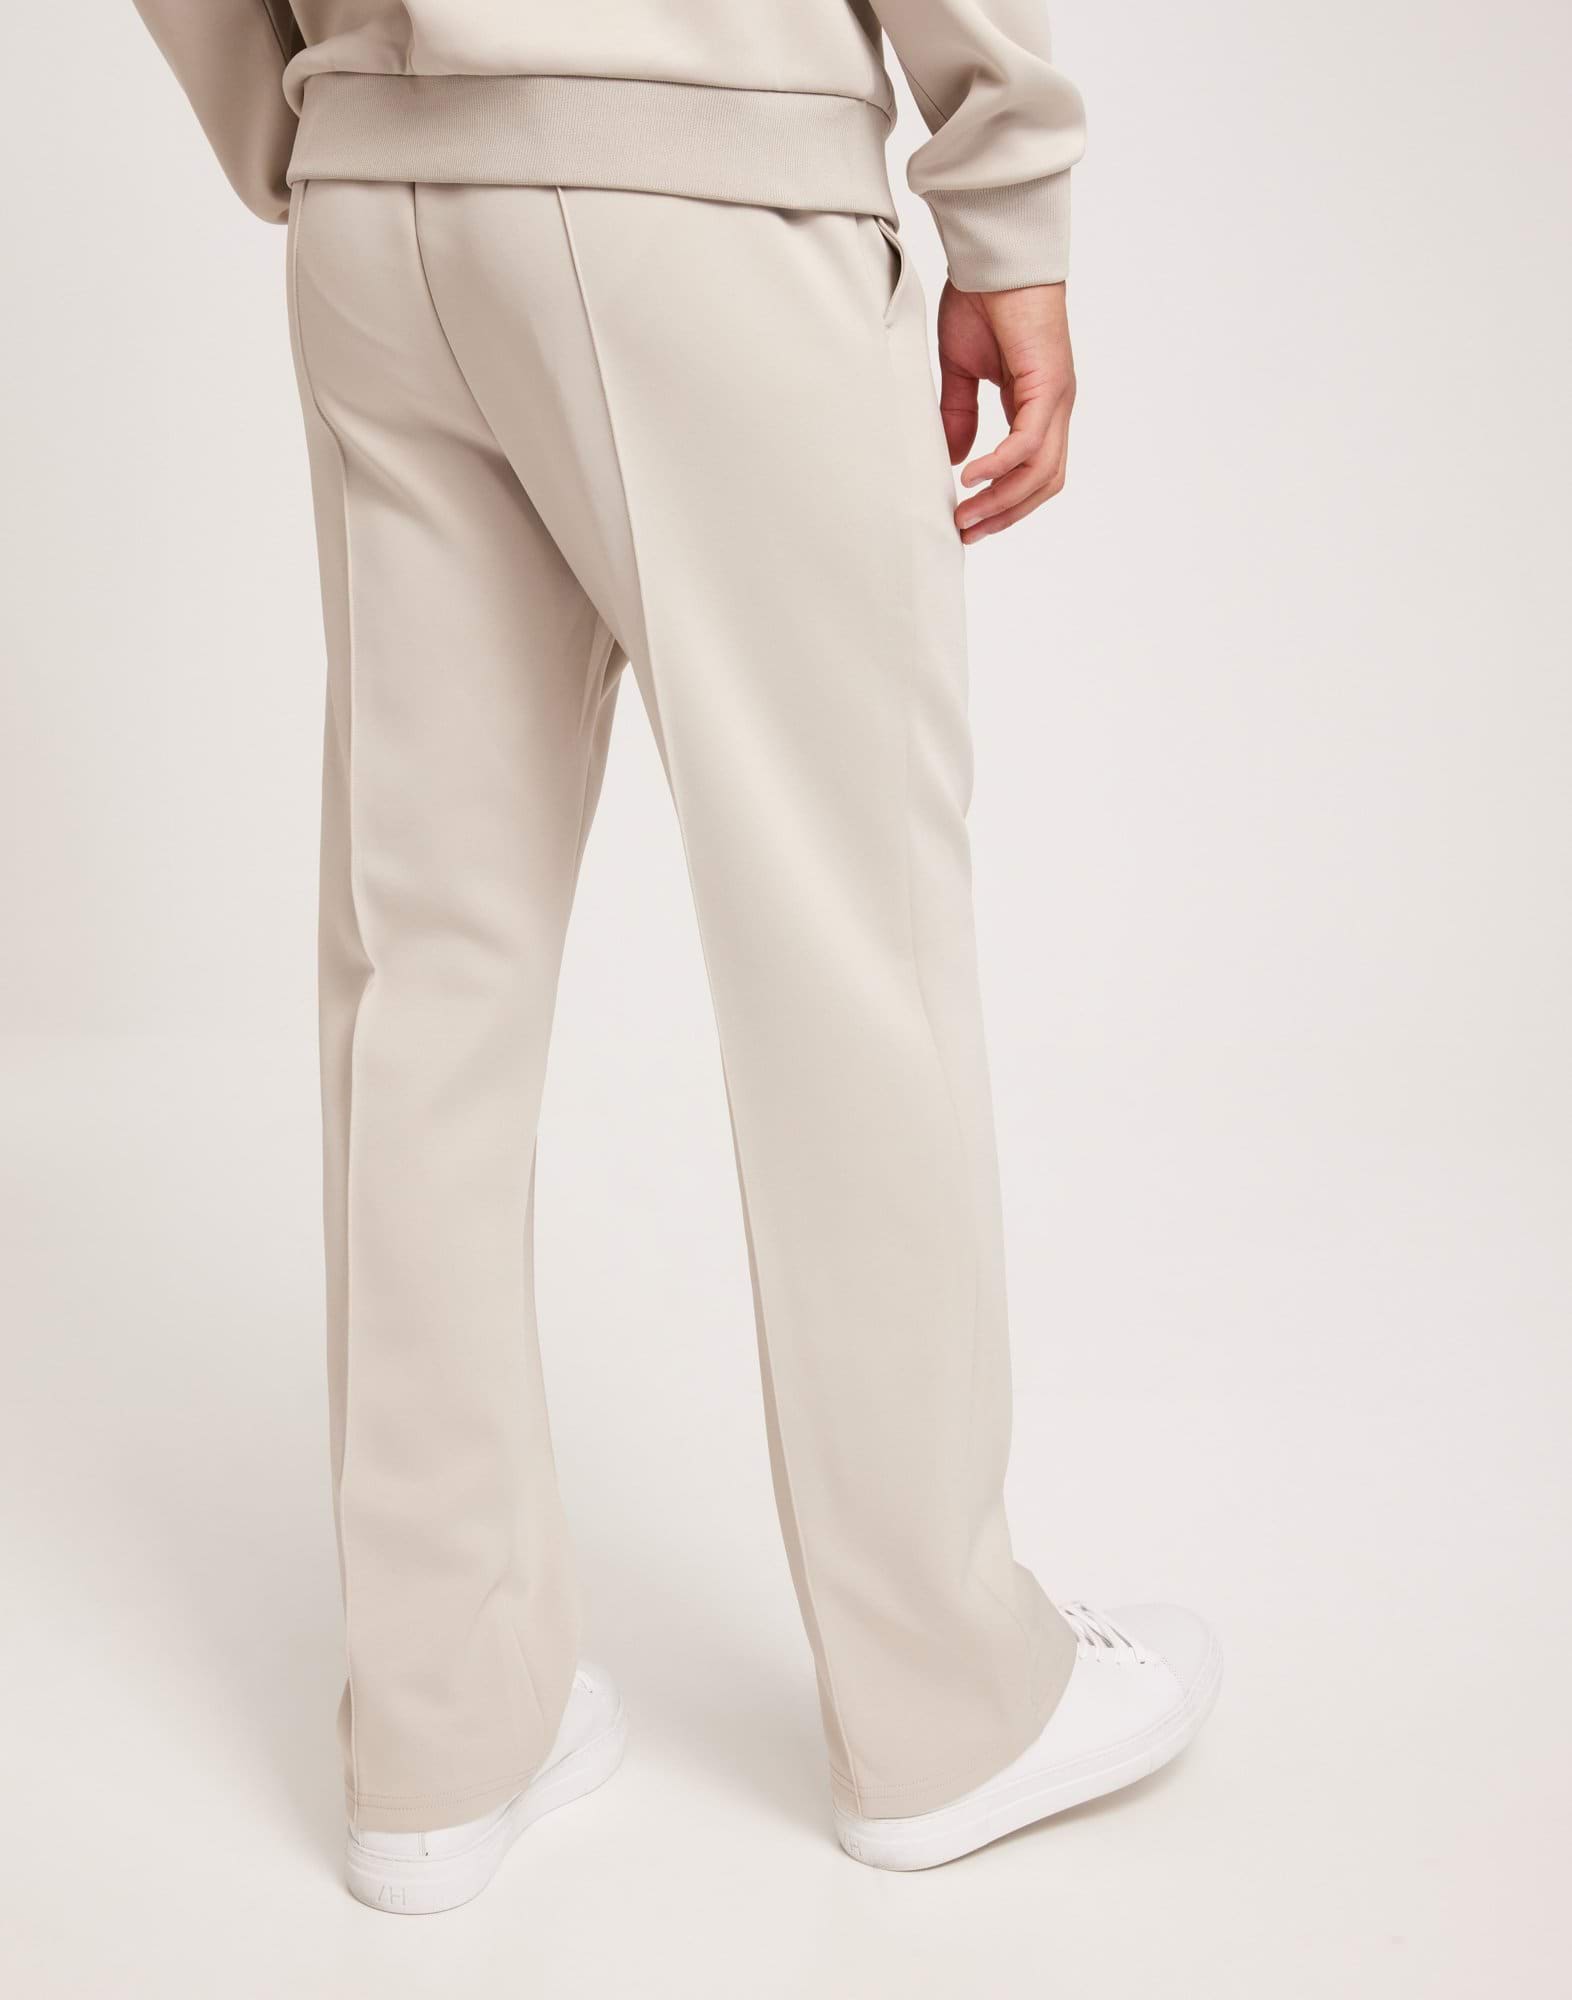 Ballier Casual Track Pant